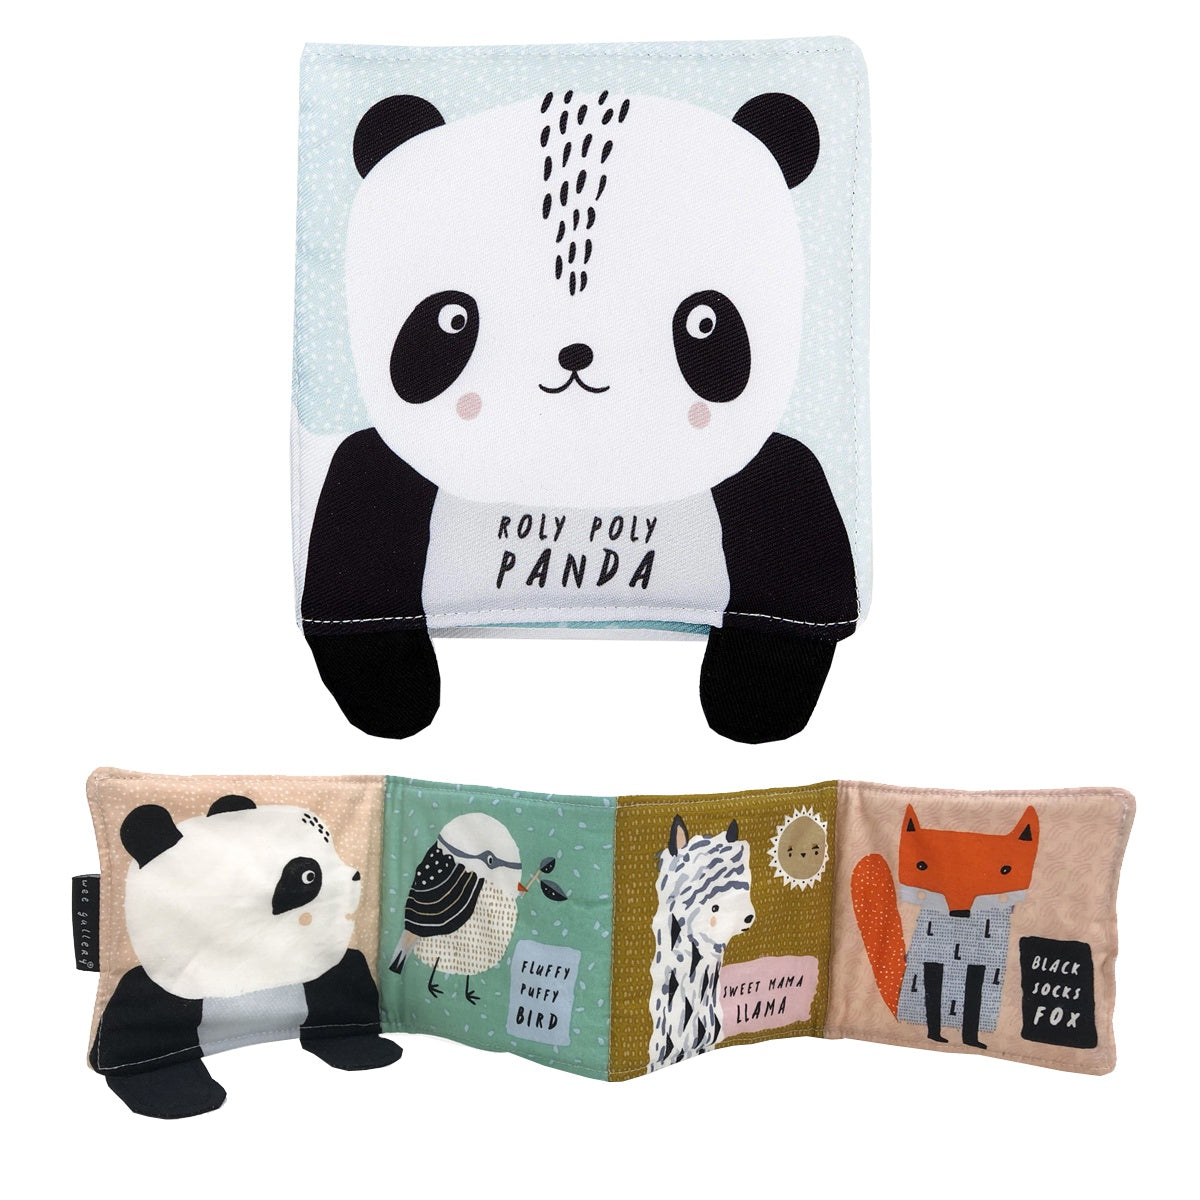 Roly Poly Panda (Wee Gallery Cloth Book)